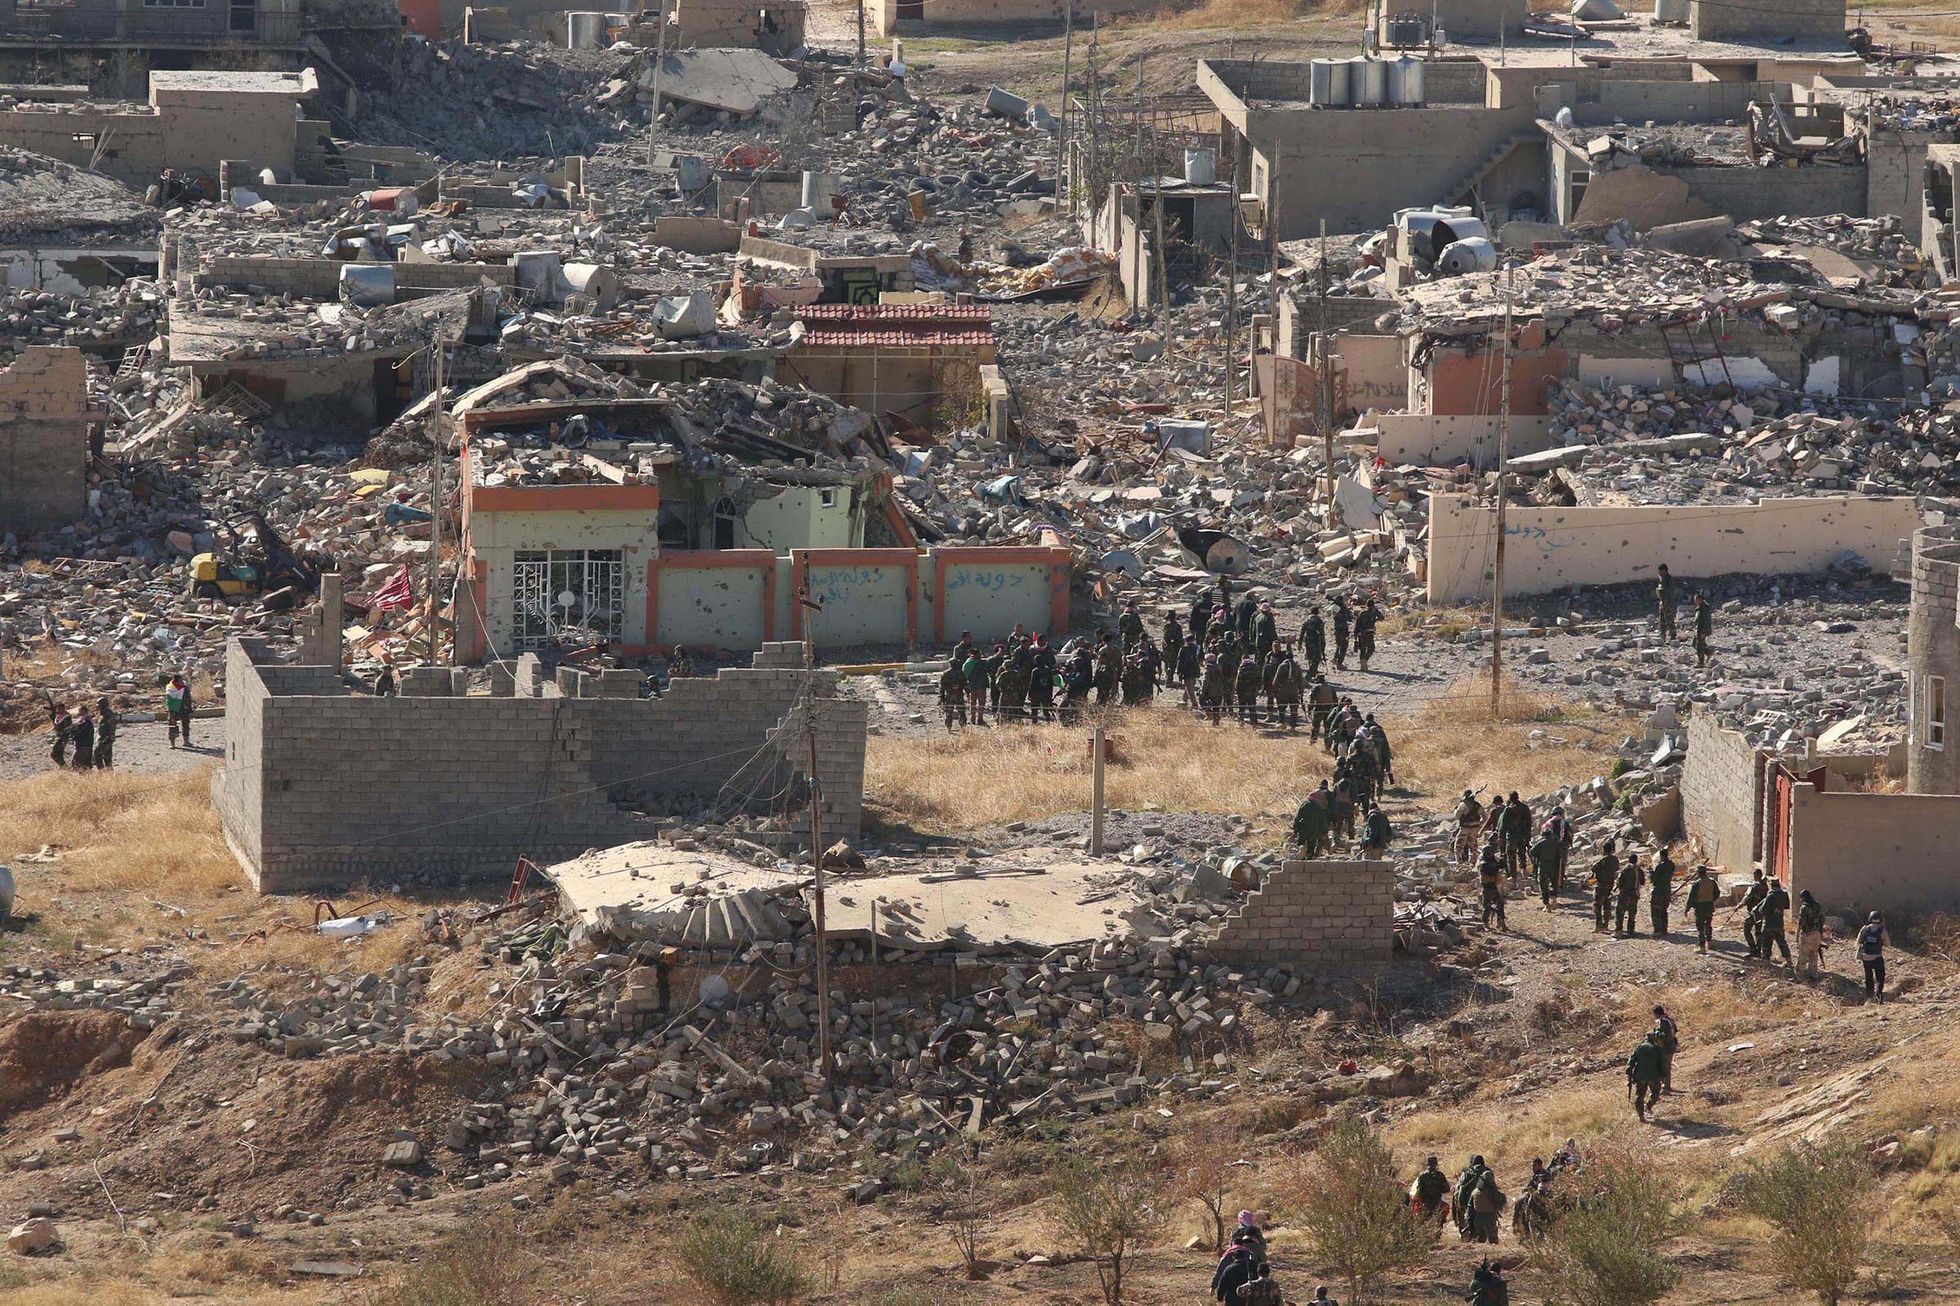 Members of the Kurdish peshmerga forces gather in the town of Sinjar